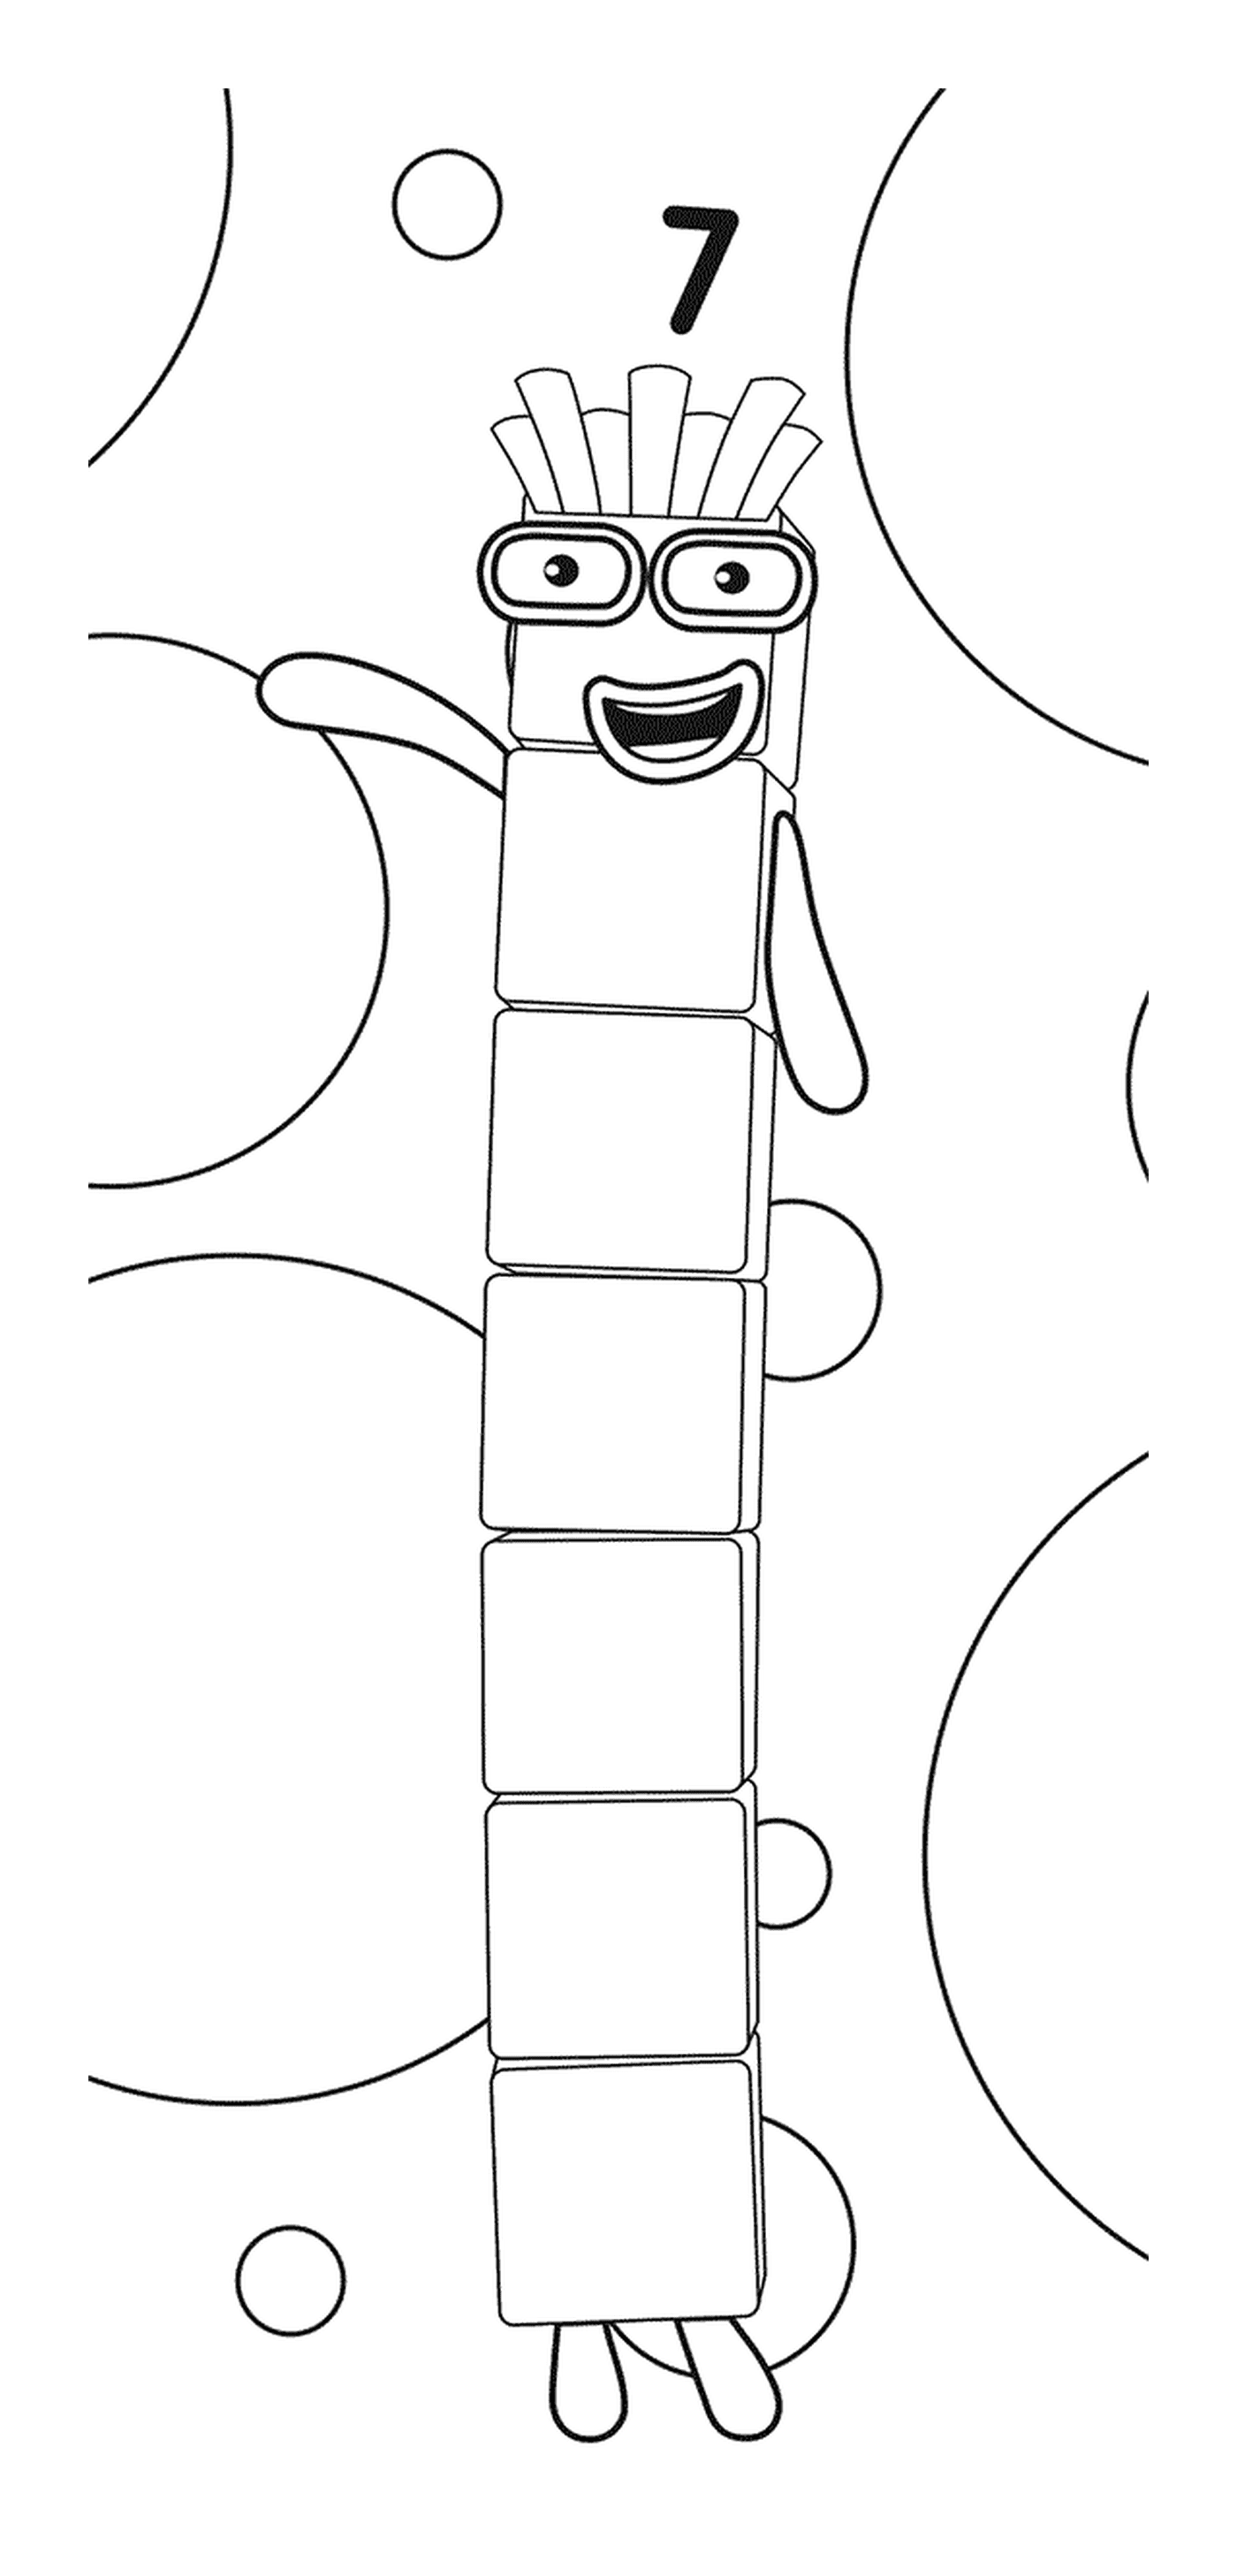  Numberblocks number 7, a staircase 